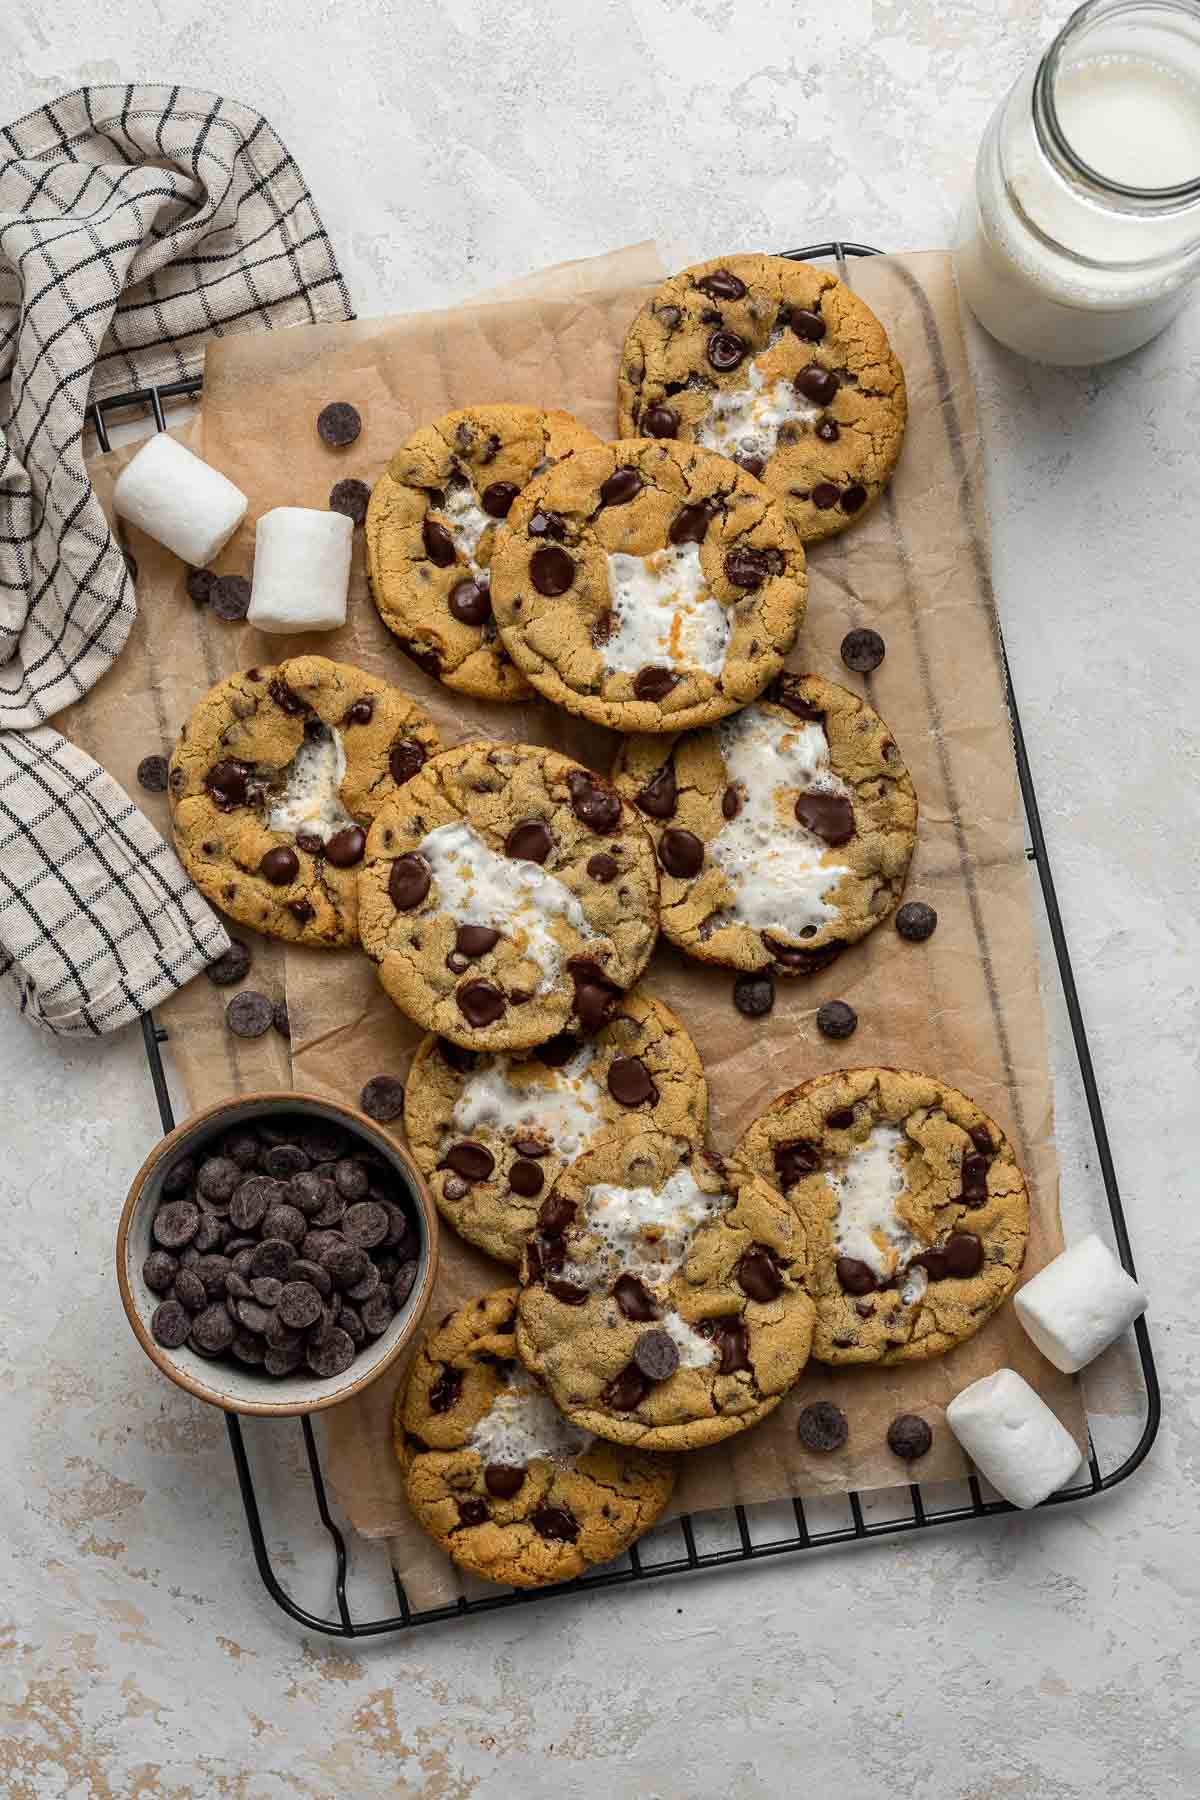 Chocolate chip cookies with a white melted marshmallow in the center.